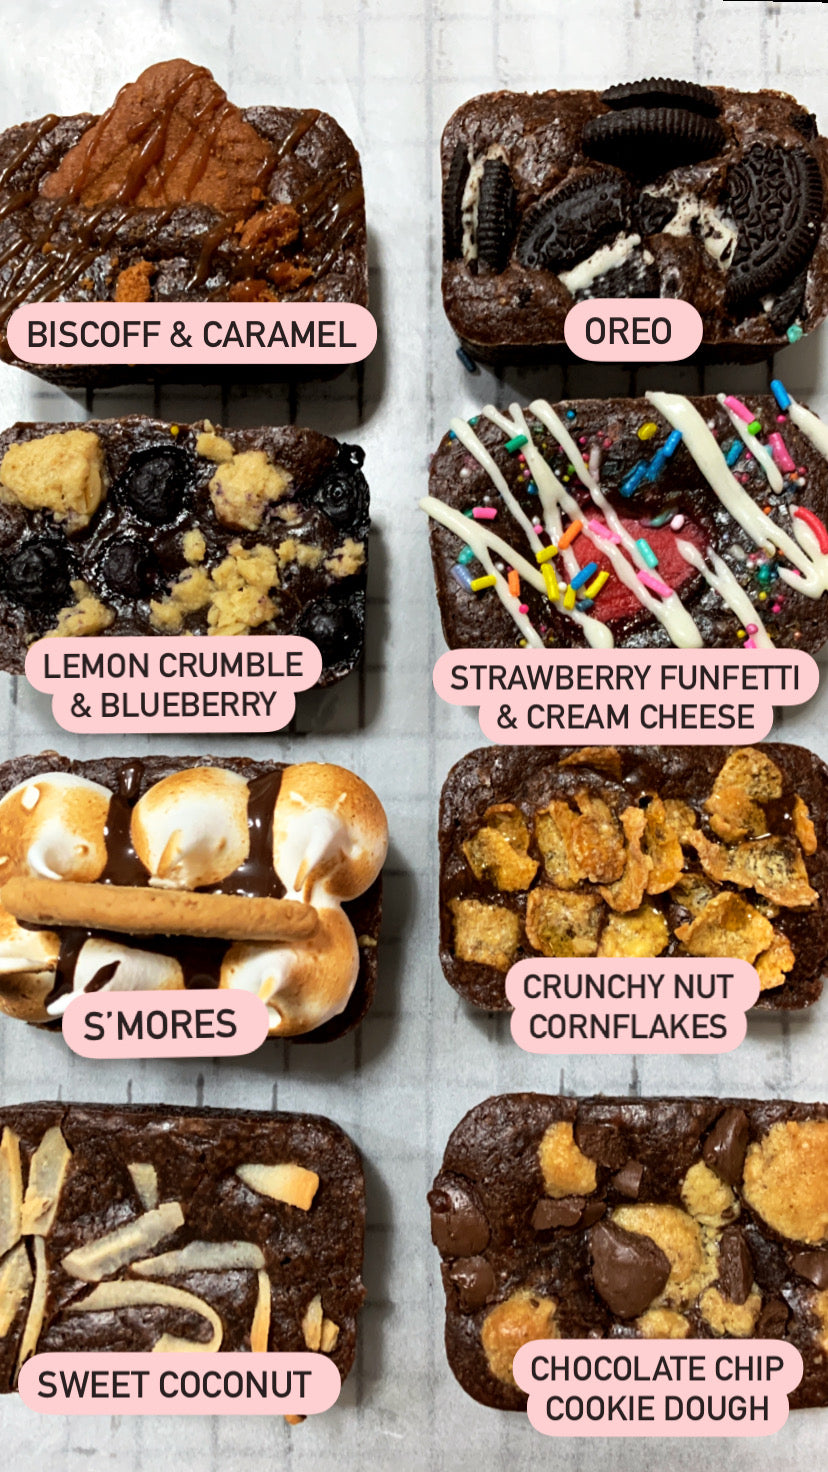 The "Build Your Own" Brownie Variety Box